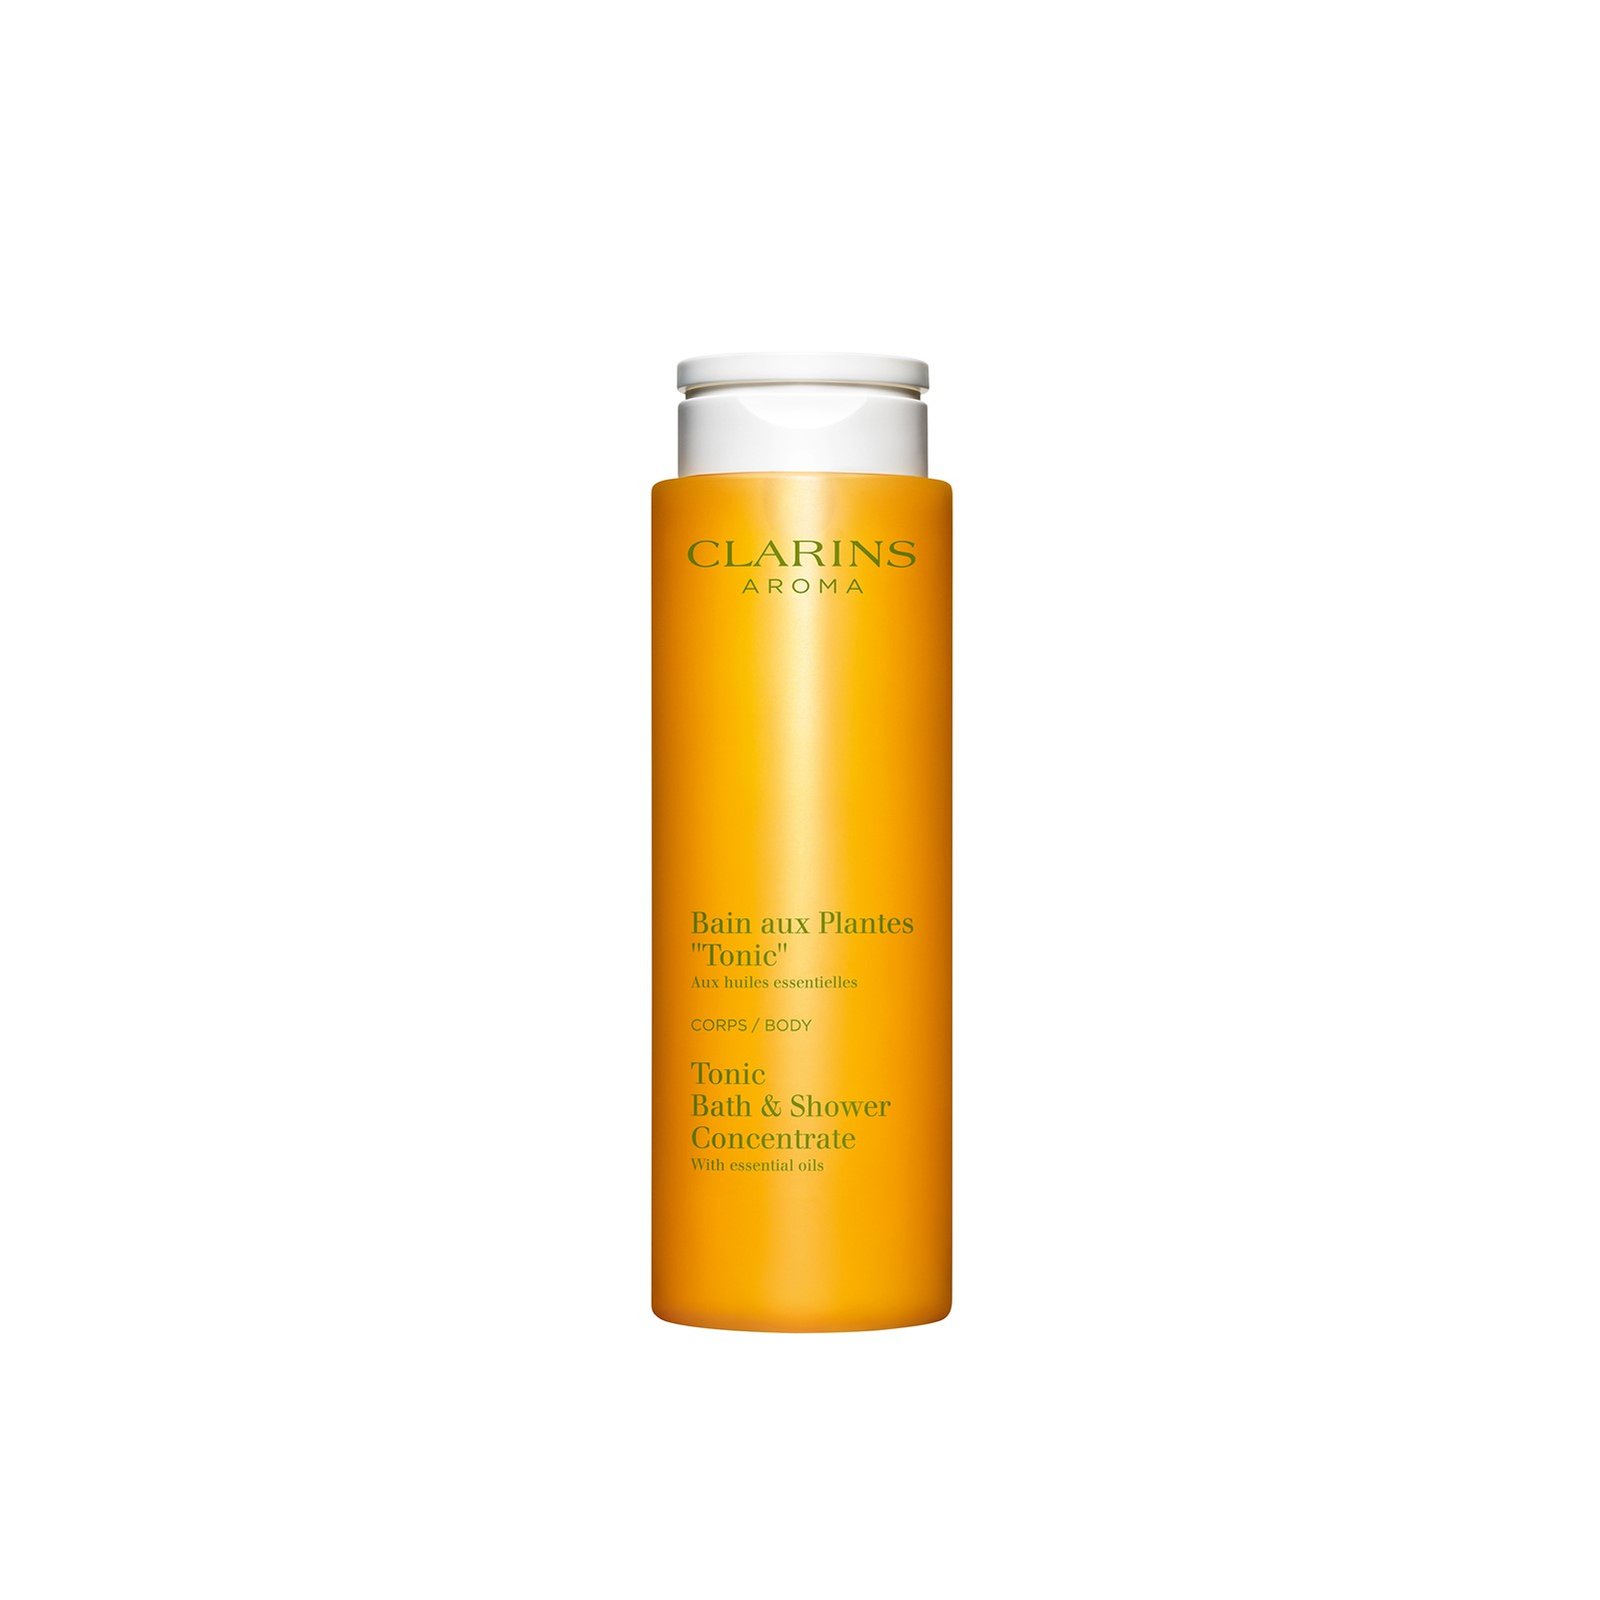 Clarins Aroma Tonic Bath & Shower Concentrate 200ml (6.7 fl oz)